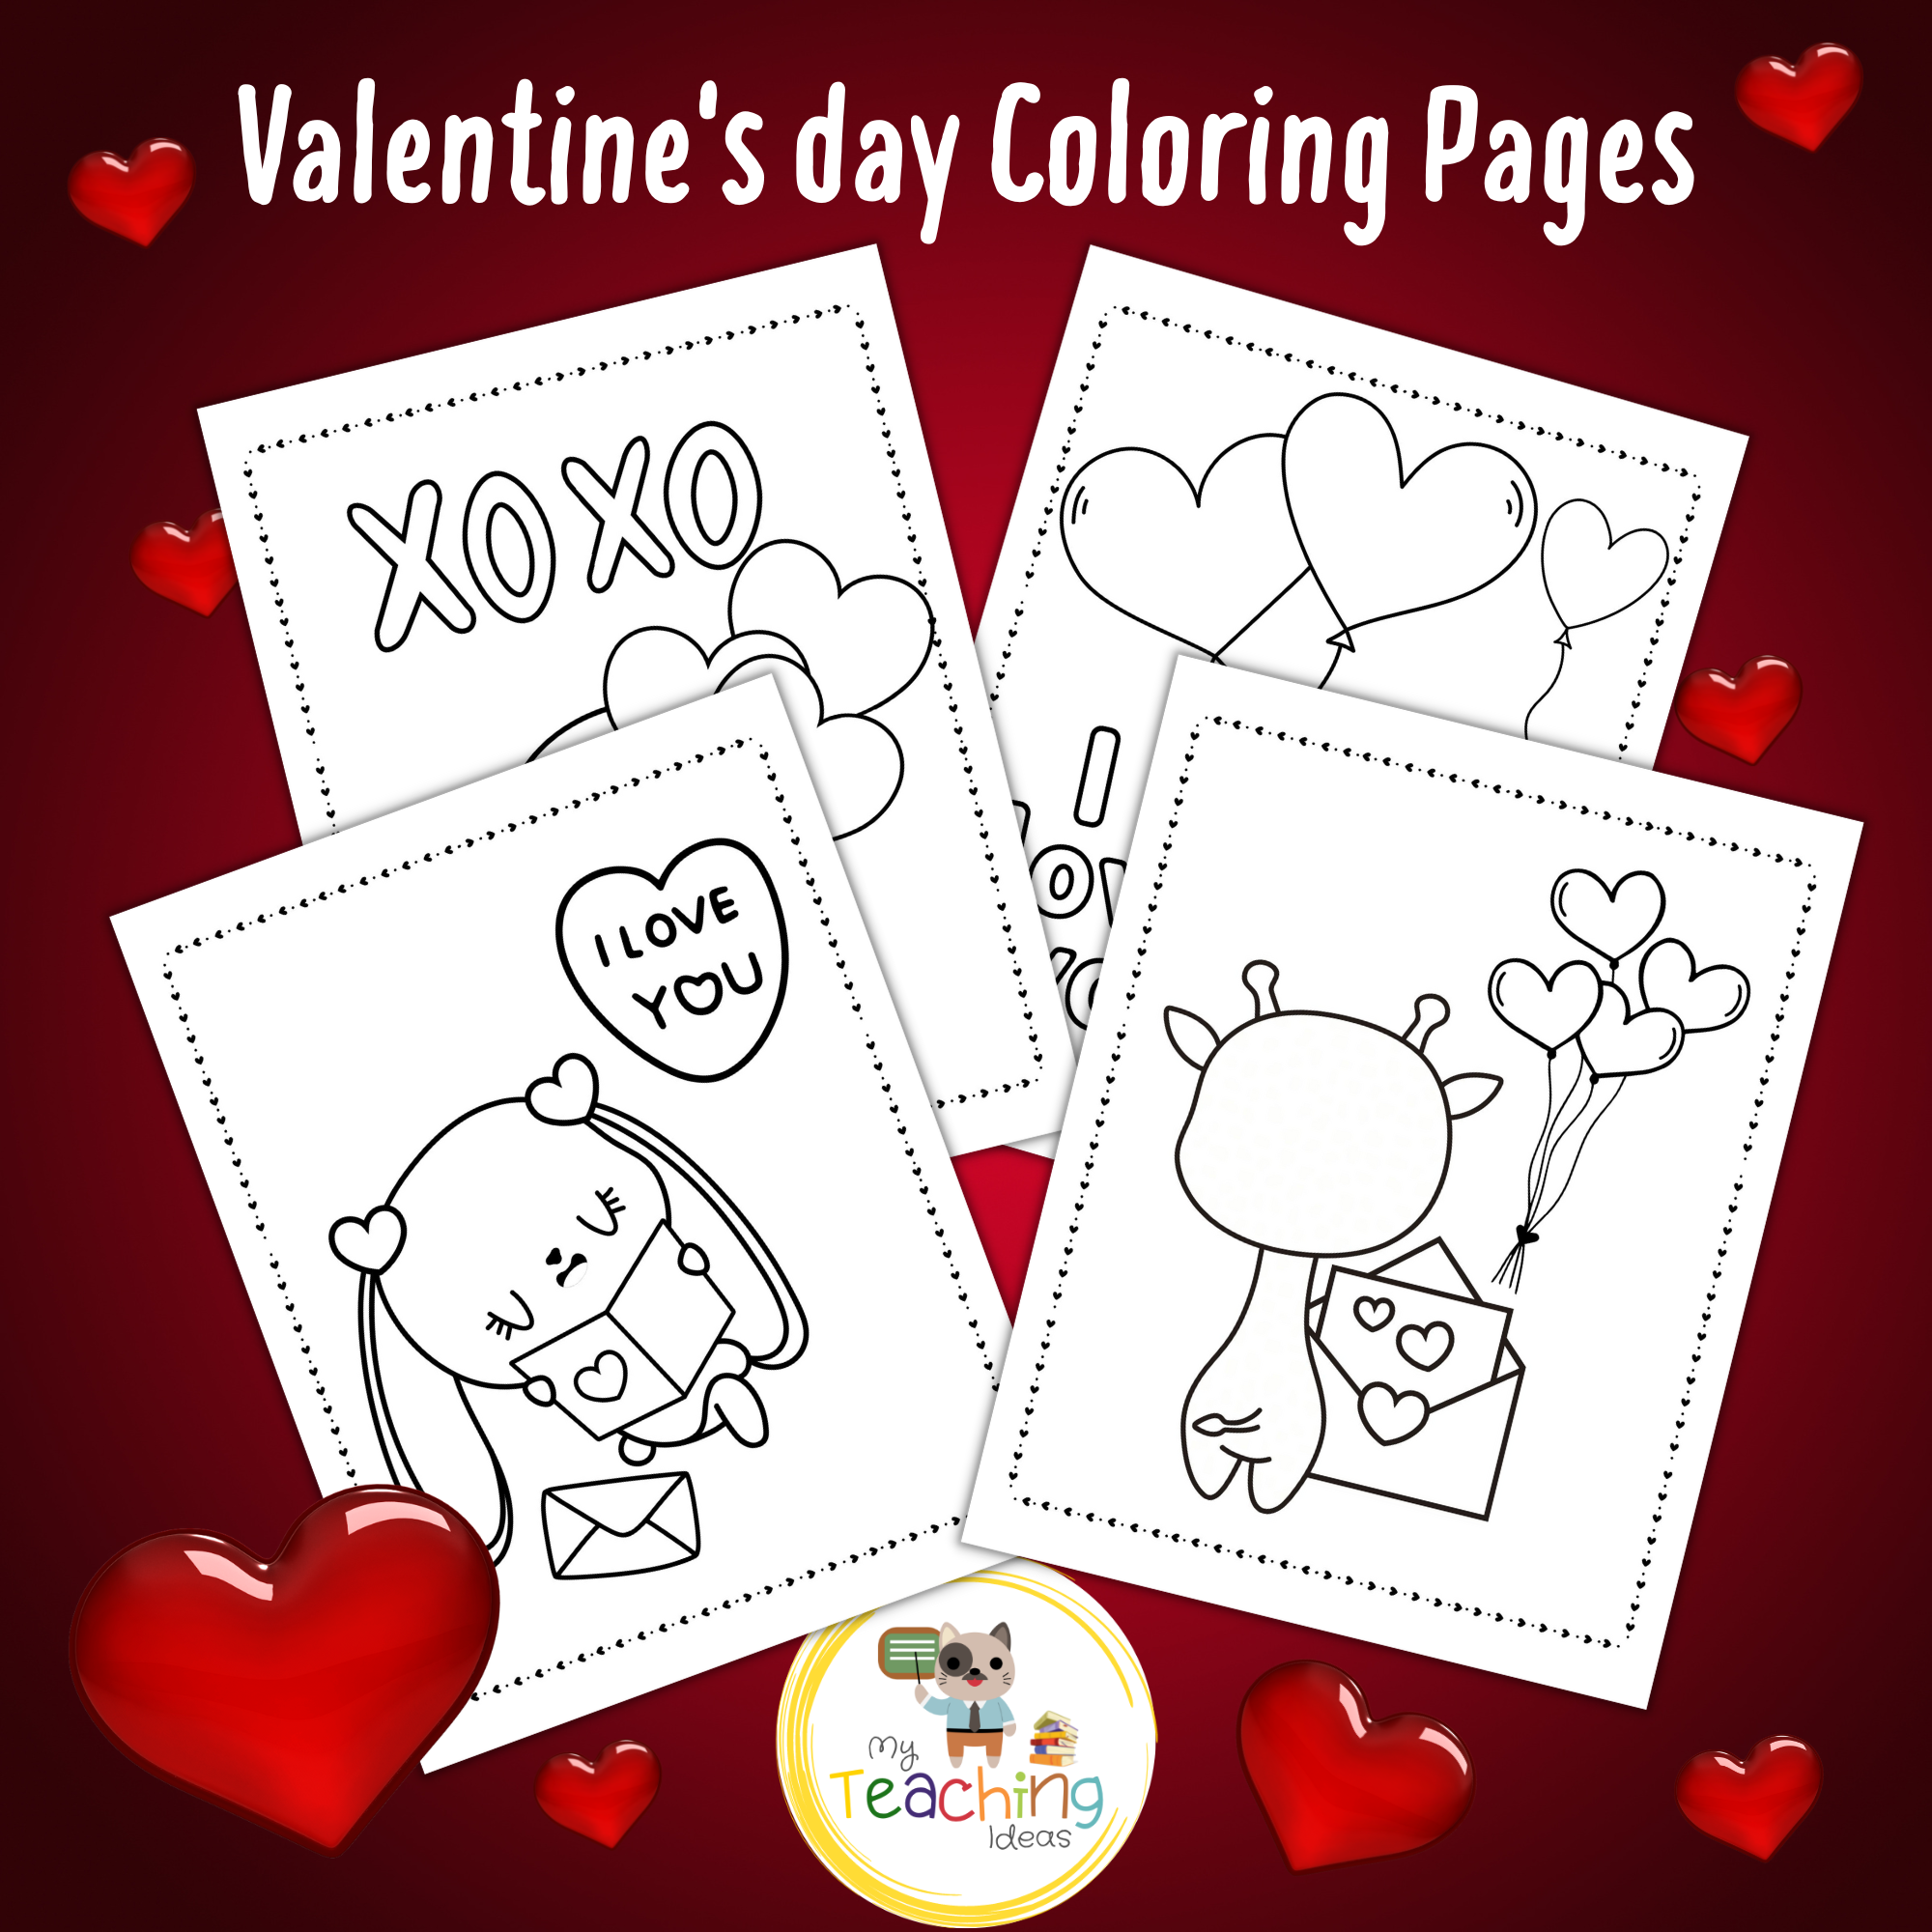 Valentines day coloring pages valentines day activity february activities made by teachers